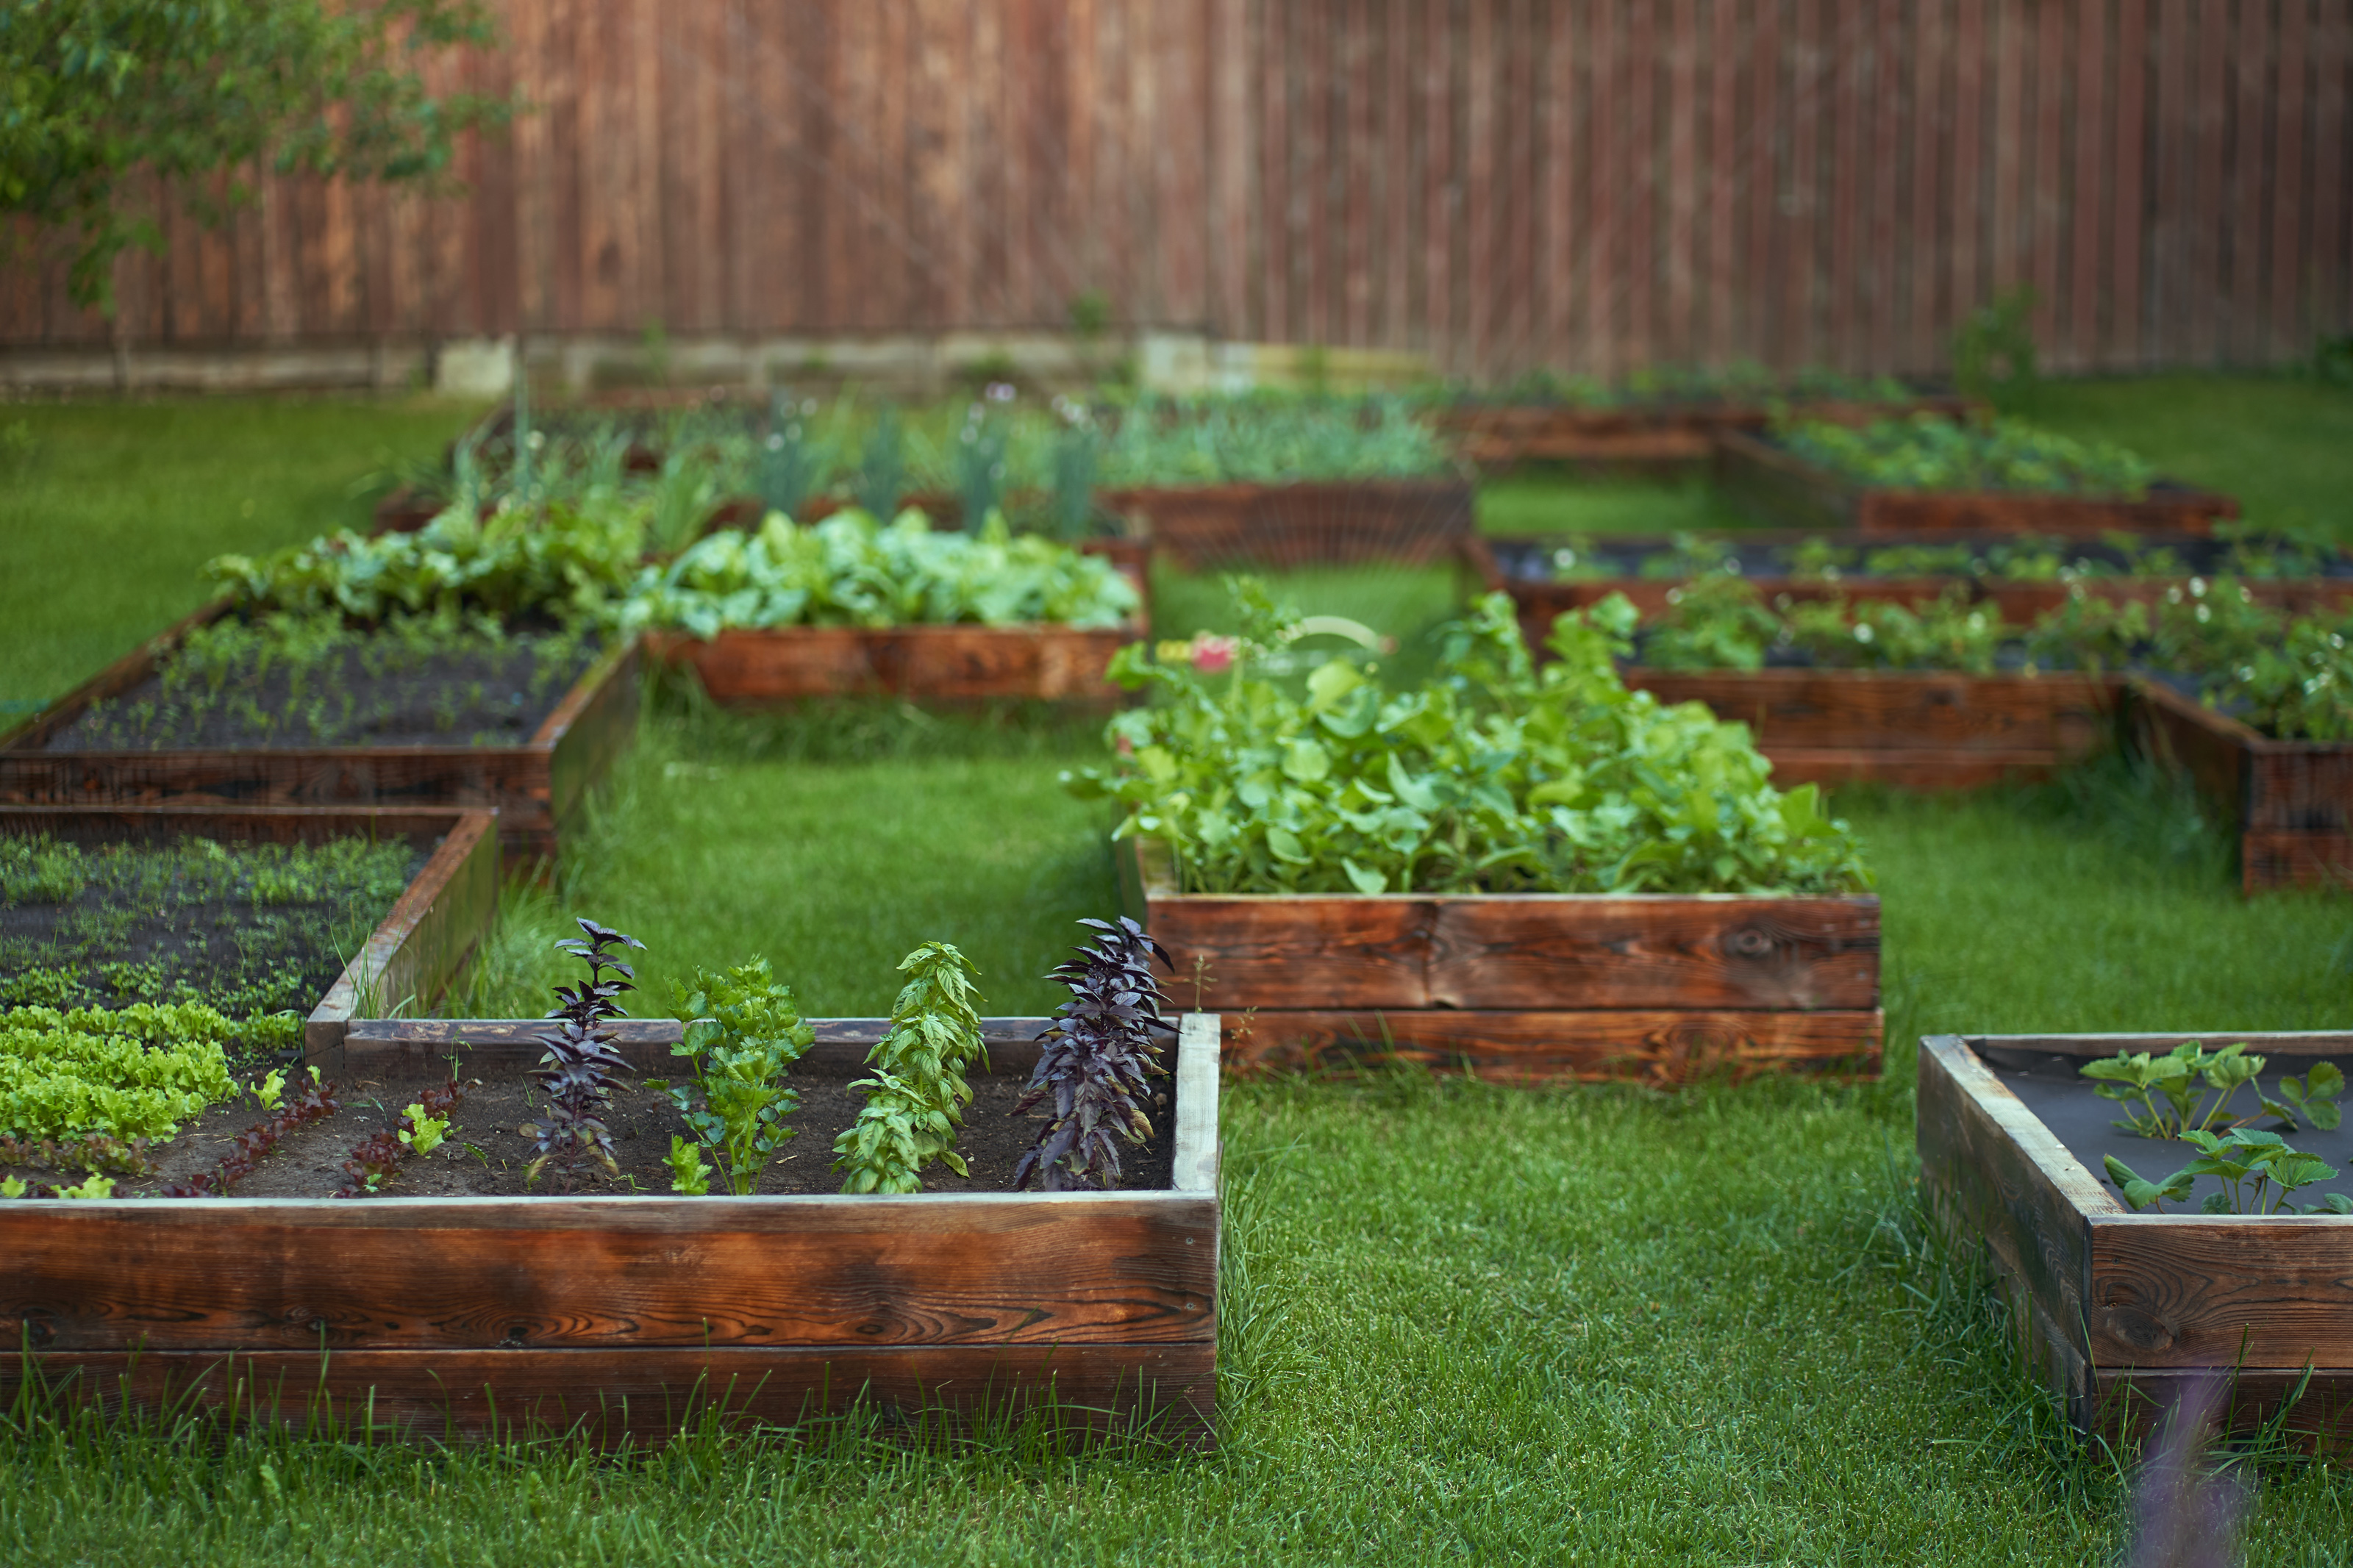 A variety of fruits and vegetables planted in a garden in a yard with an automatic waterer.